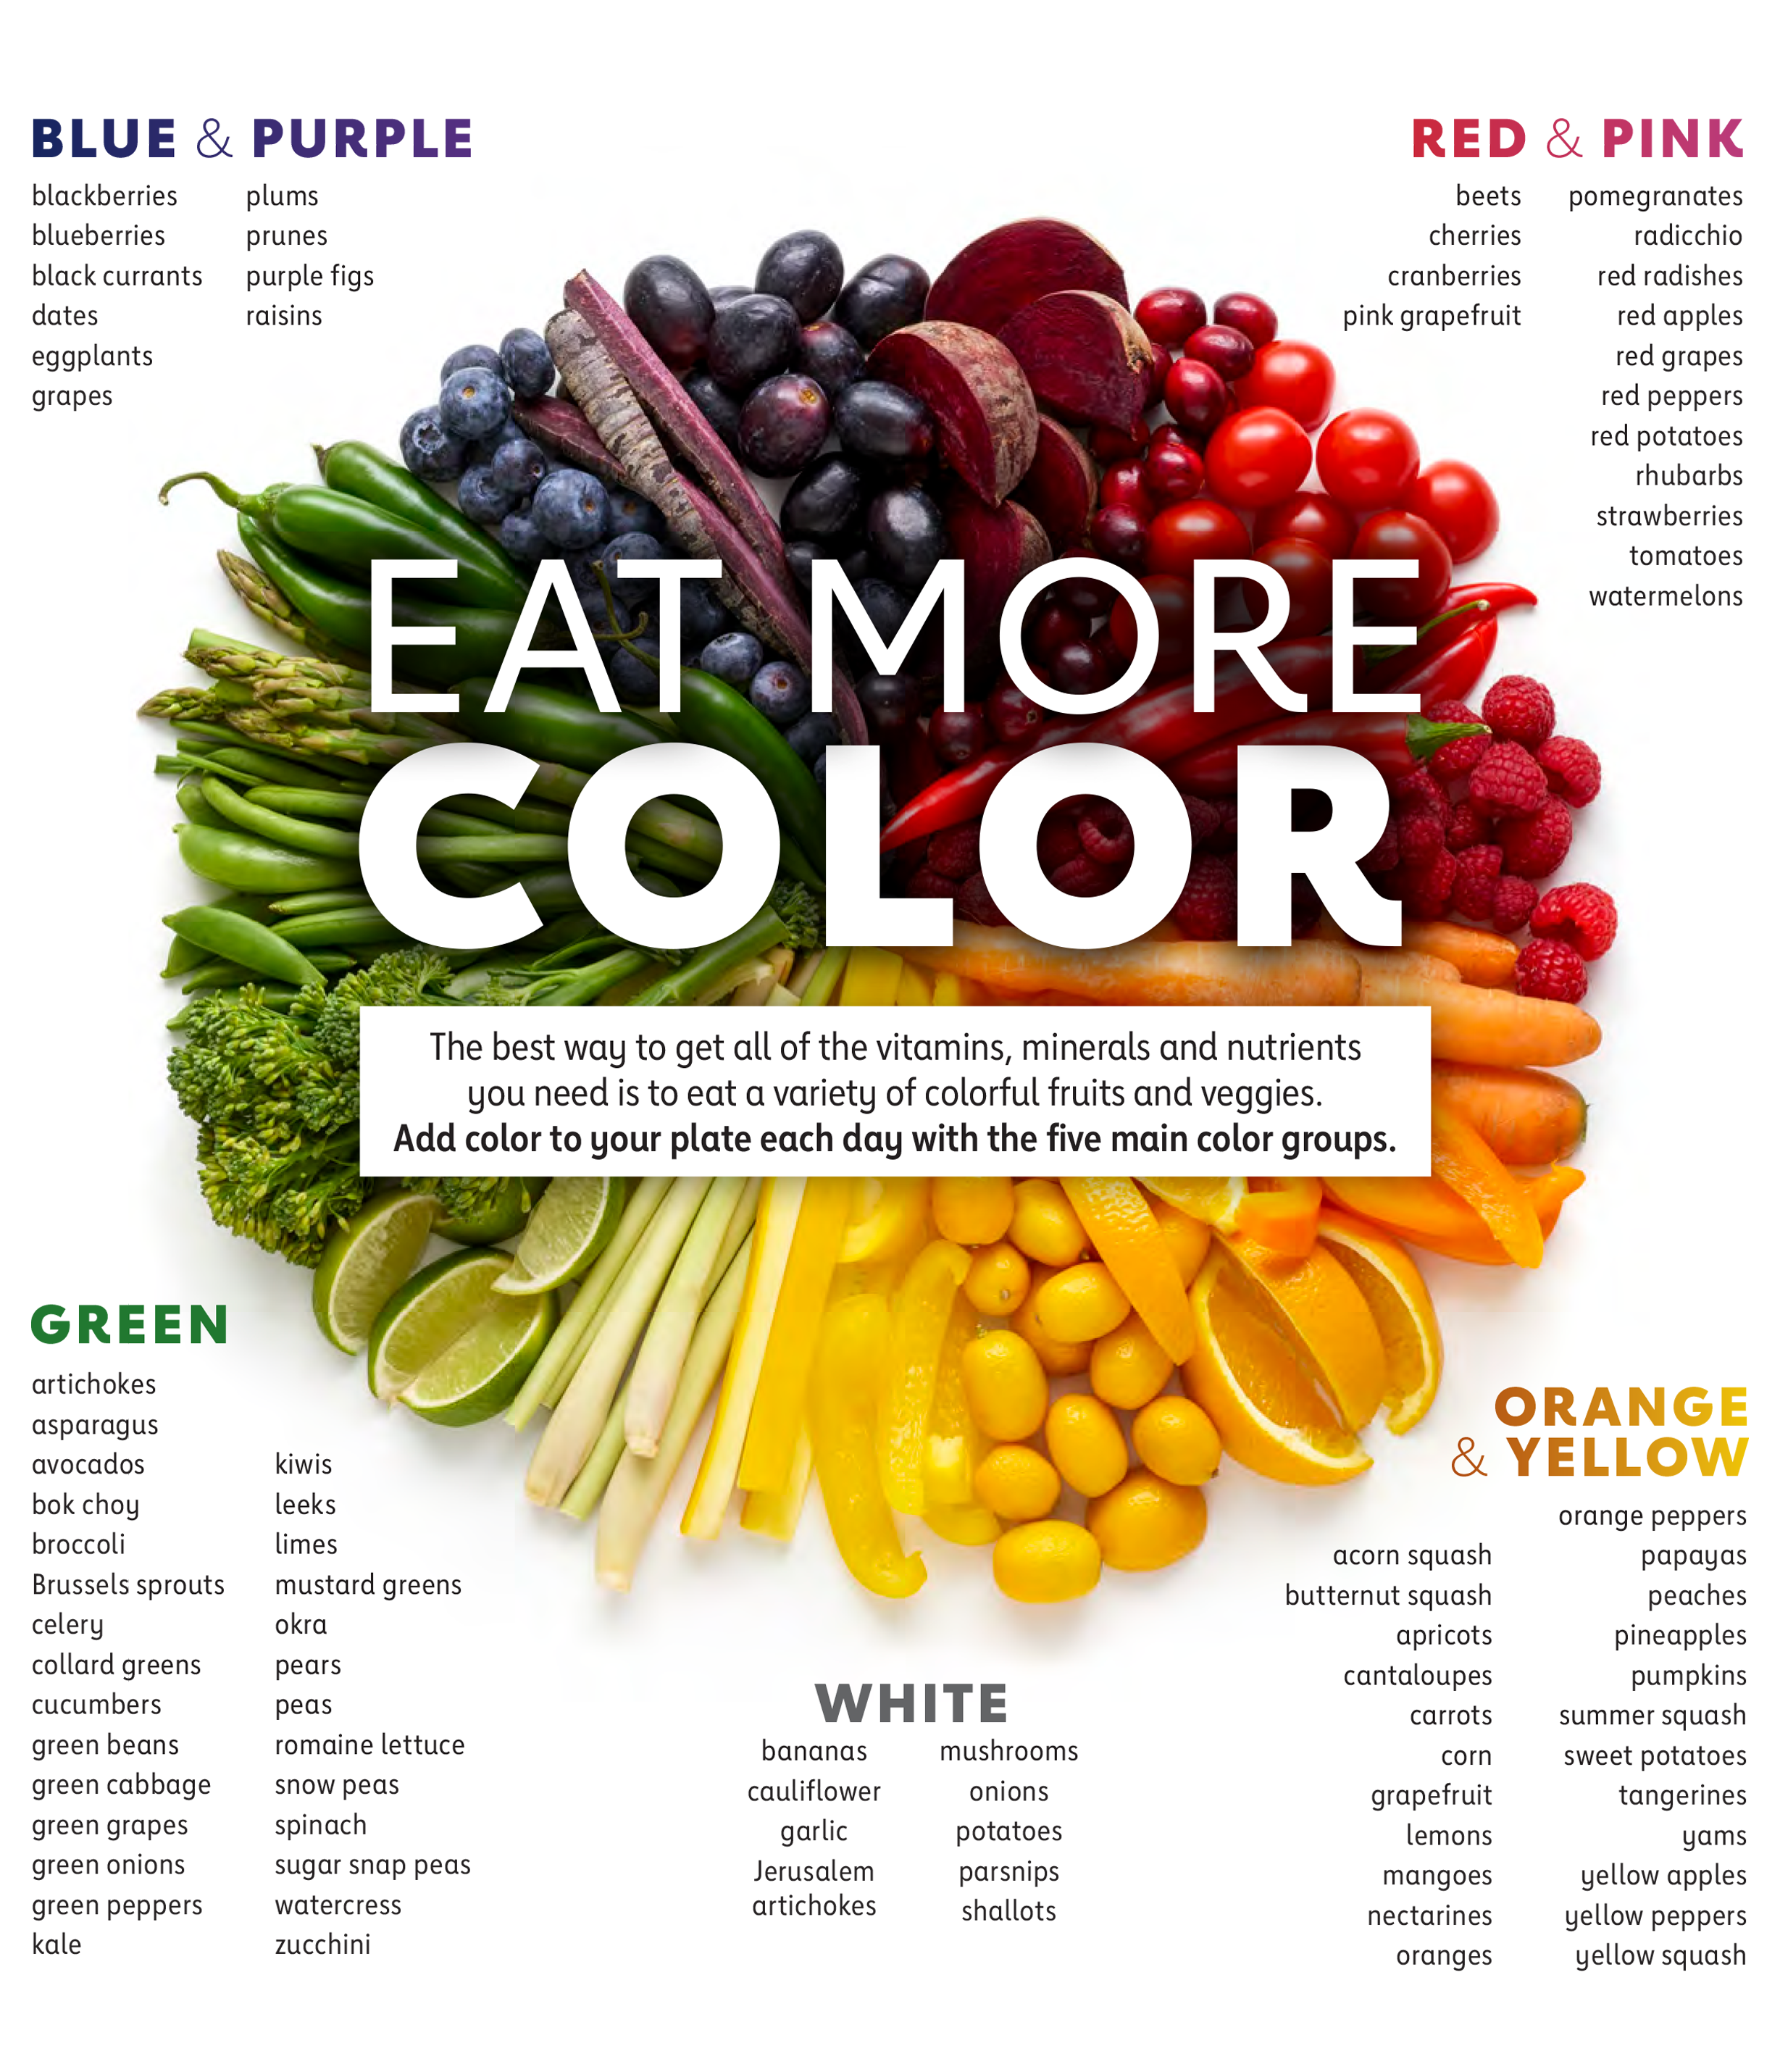 A variety of fruits and vegetables are arranged in a circle by color. Lists of the items by color are provided around the graphic. The center reads "EAT MORE COLOR" and "The best way to get all of the vitamins, minerals, and nutrients you need is to eat a variety of colorful fruits and veggies. Add color to your plate each day with the five main color groups."